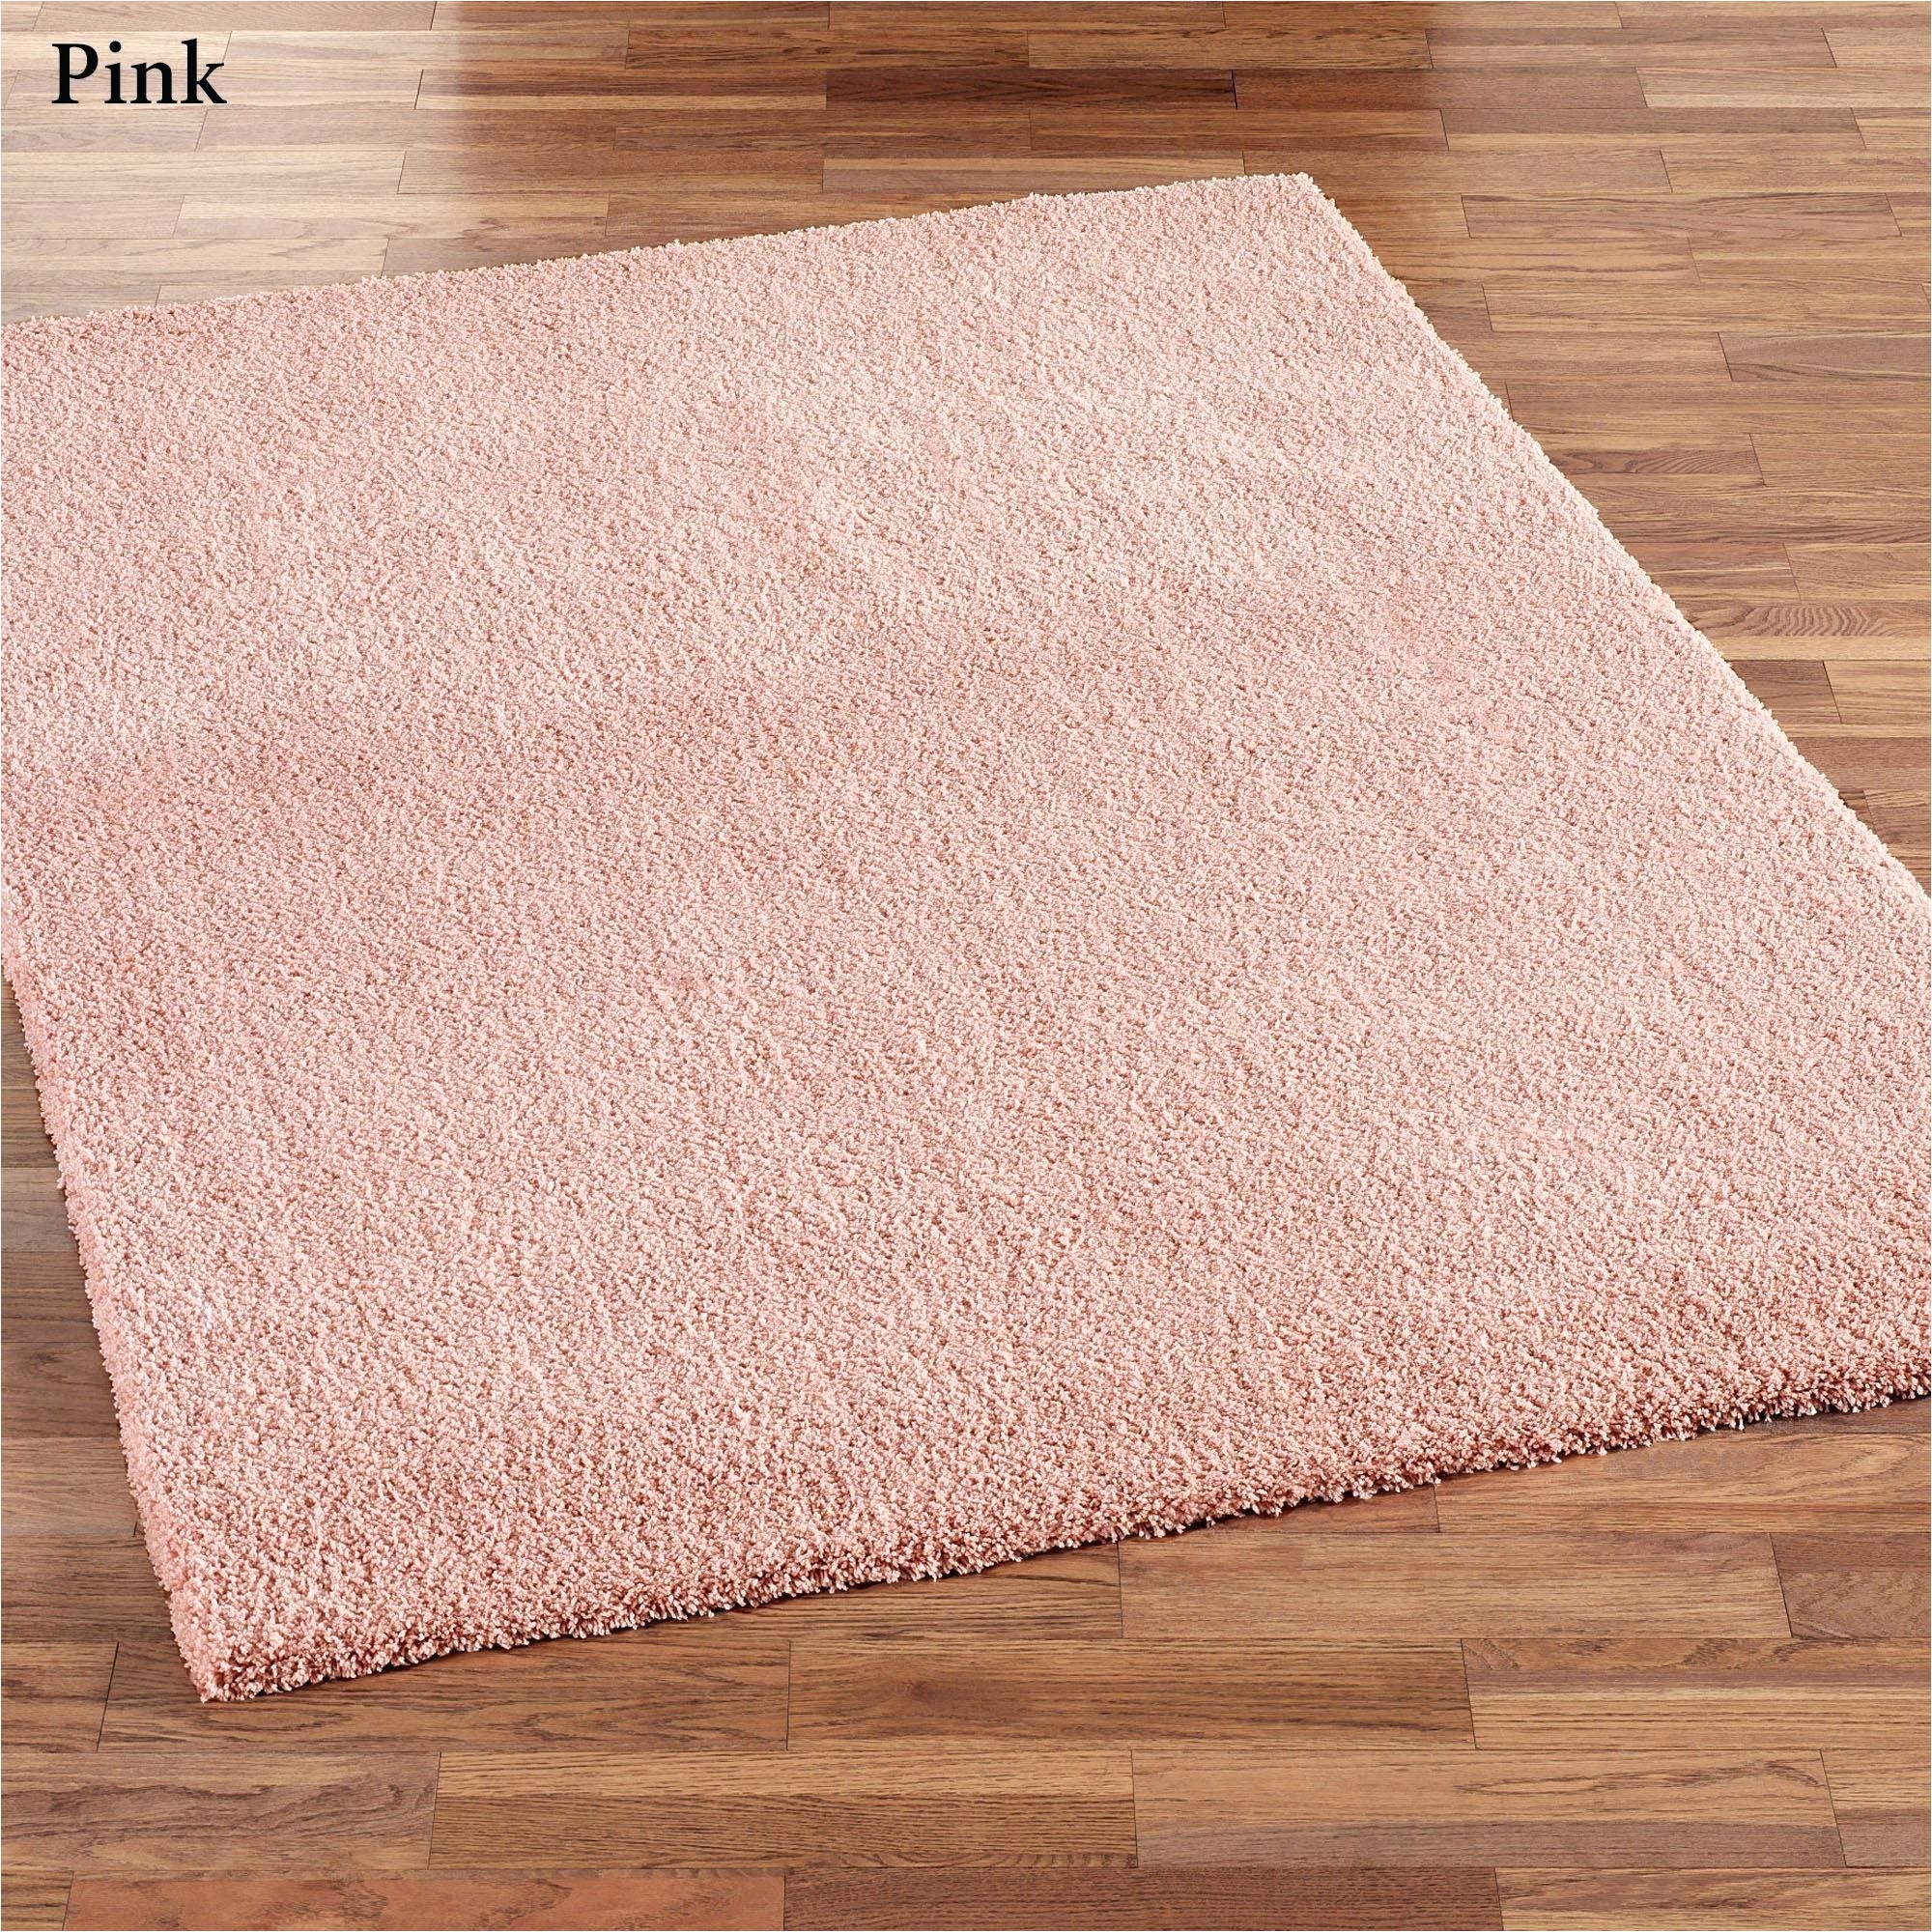 soft pink round rug area bliss shag rectangle pale default name light lattice plush rugs for bedroom carpets bedrooms dining ikea carpet cowhide